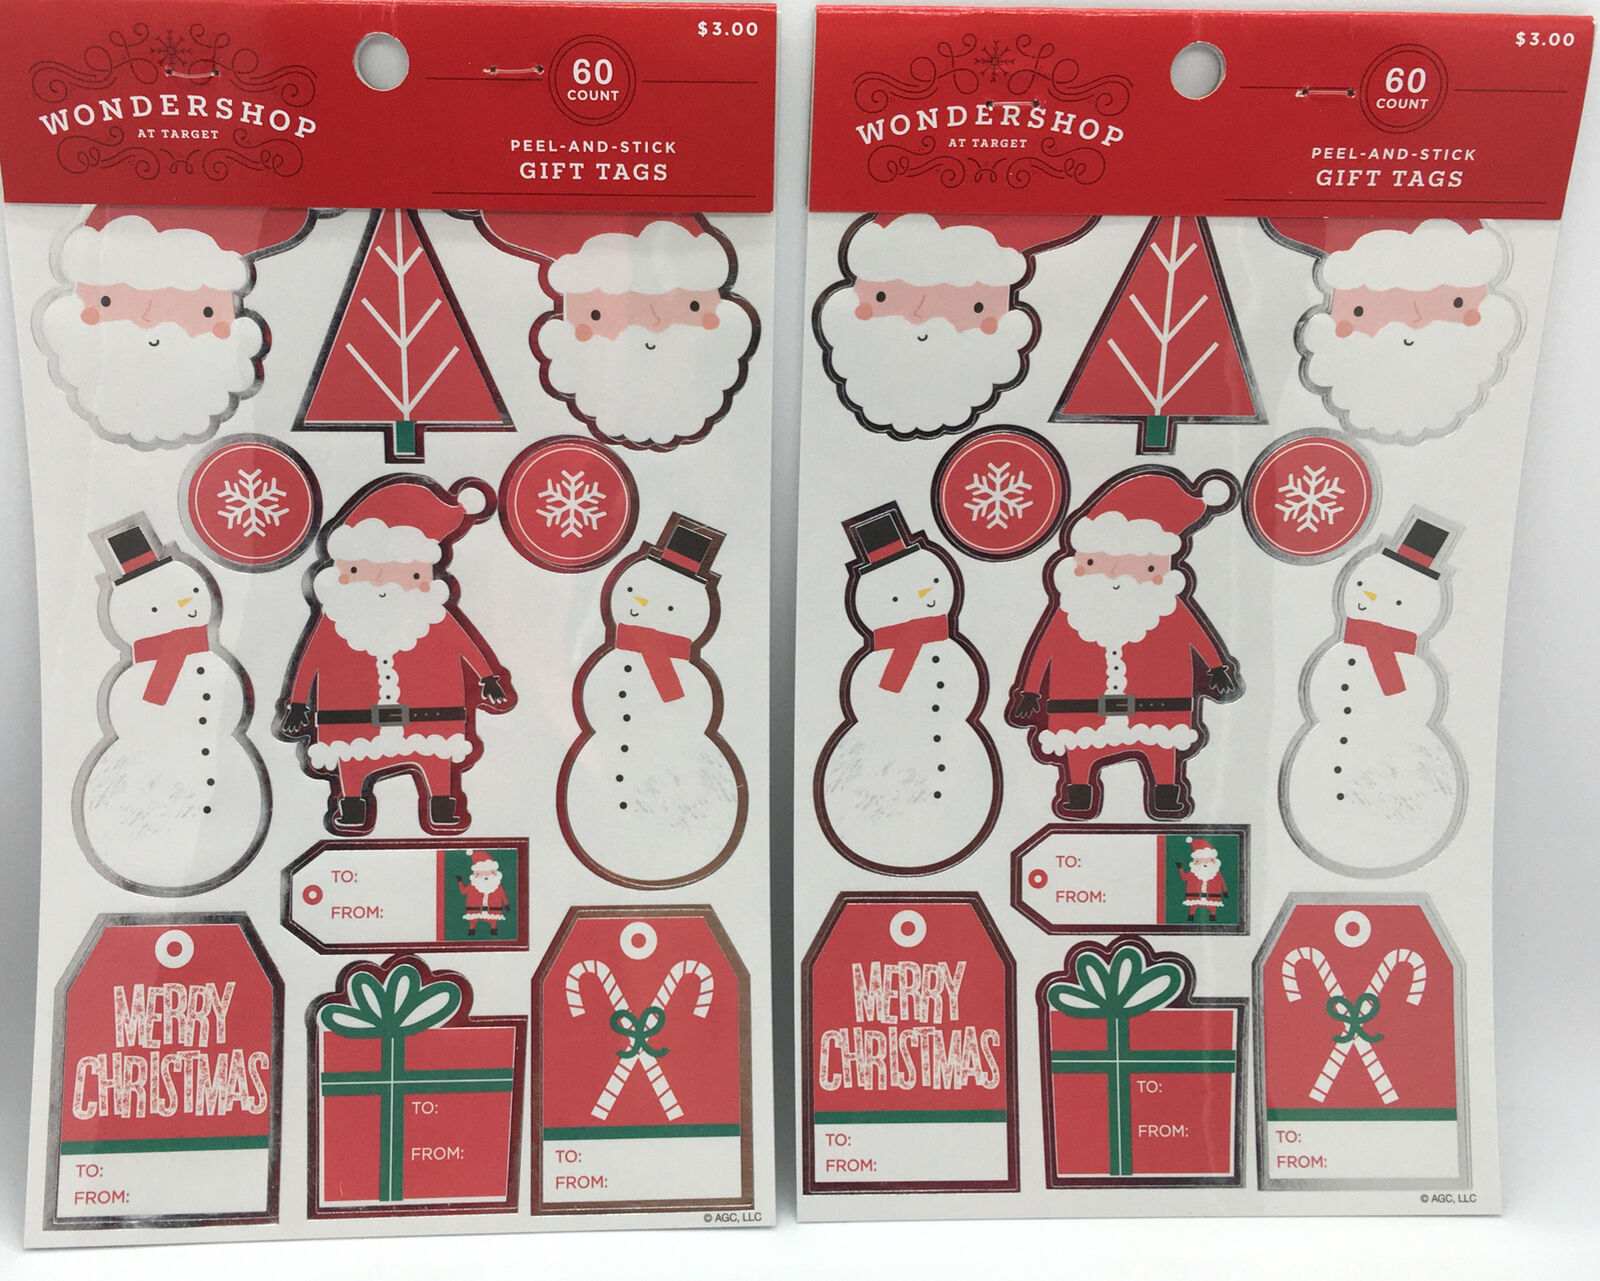 Christmas Wrap Gift Tags - Peel & Stick Santa & Friend 2 Package Of 60=120 Tags